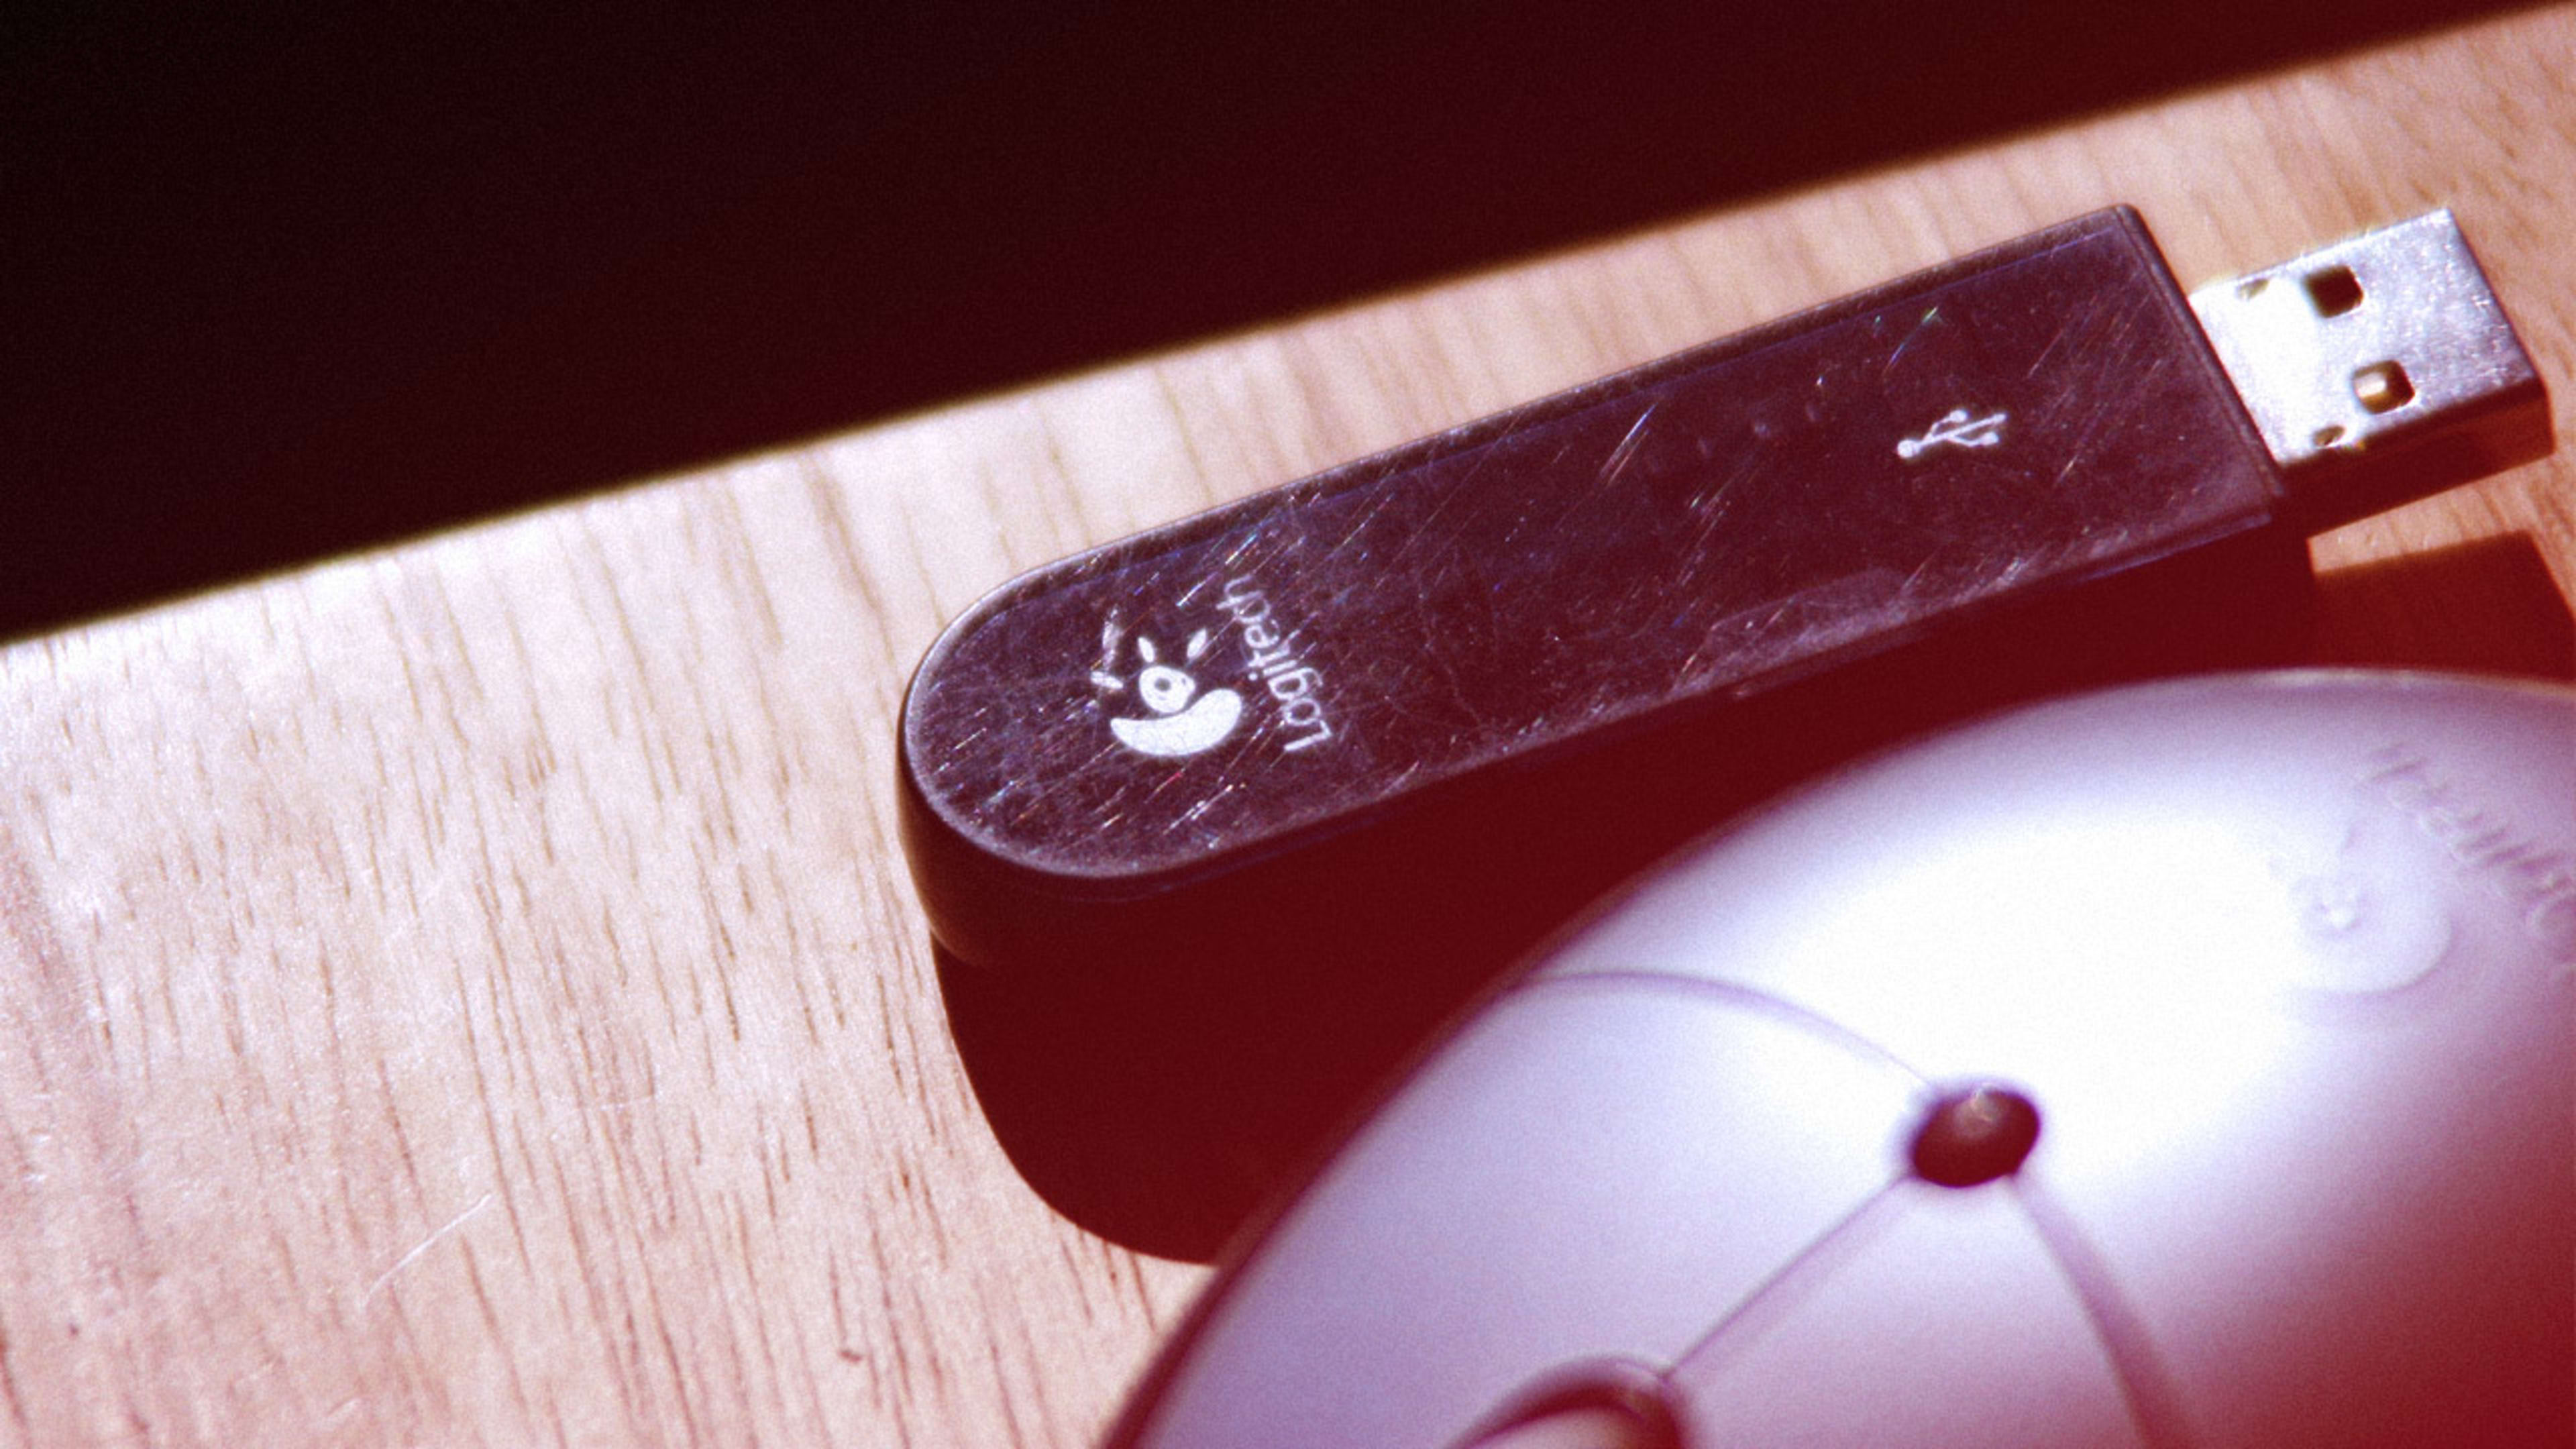 Report: Billions of Wireless Mice and Keyboards Are Vulnerable To Hacking